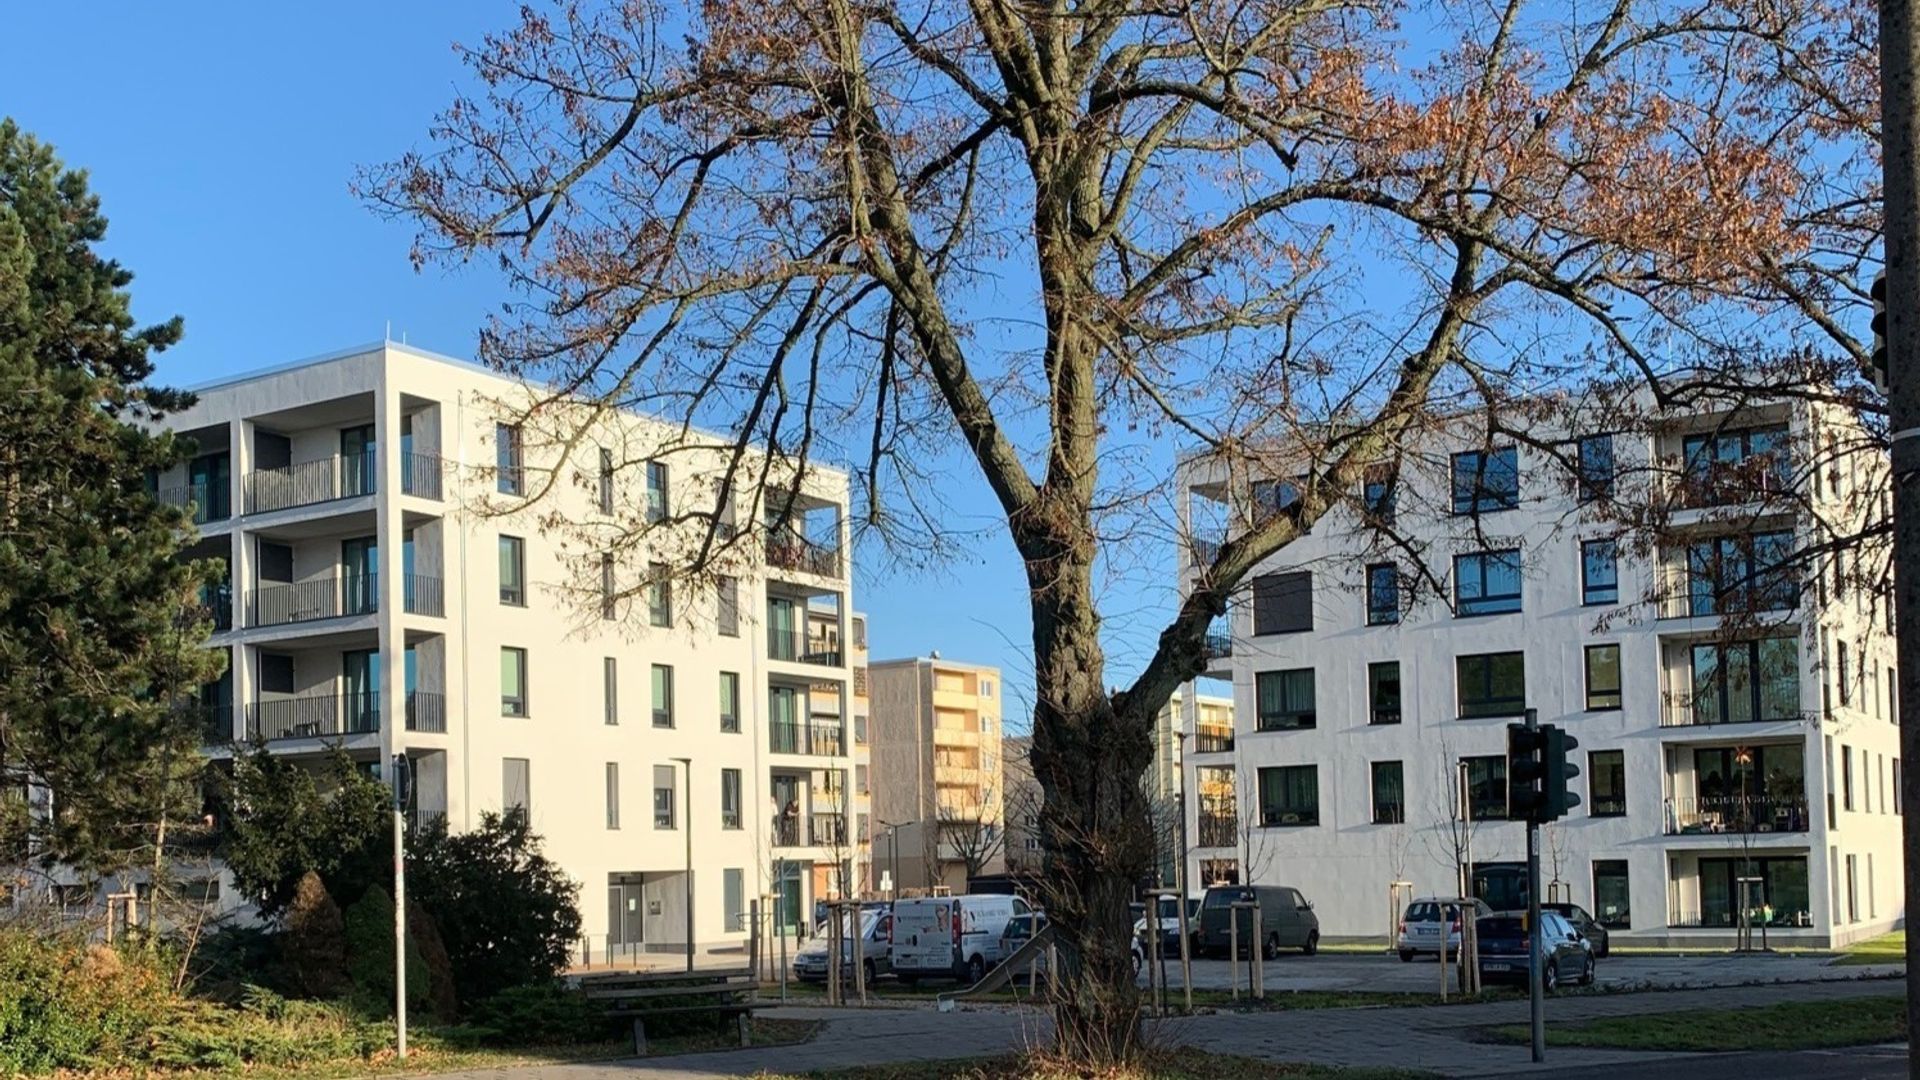 3 bedroom apartment at Otto-Grotewohl-Ring 2, 15344 Strausberg, Germany |  #6510854 | Rentberry